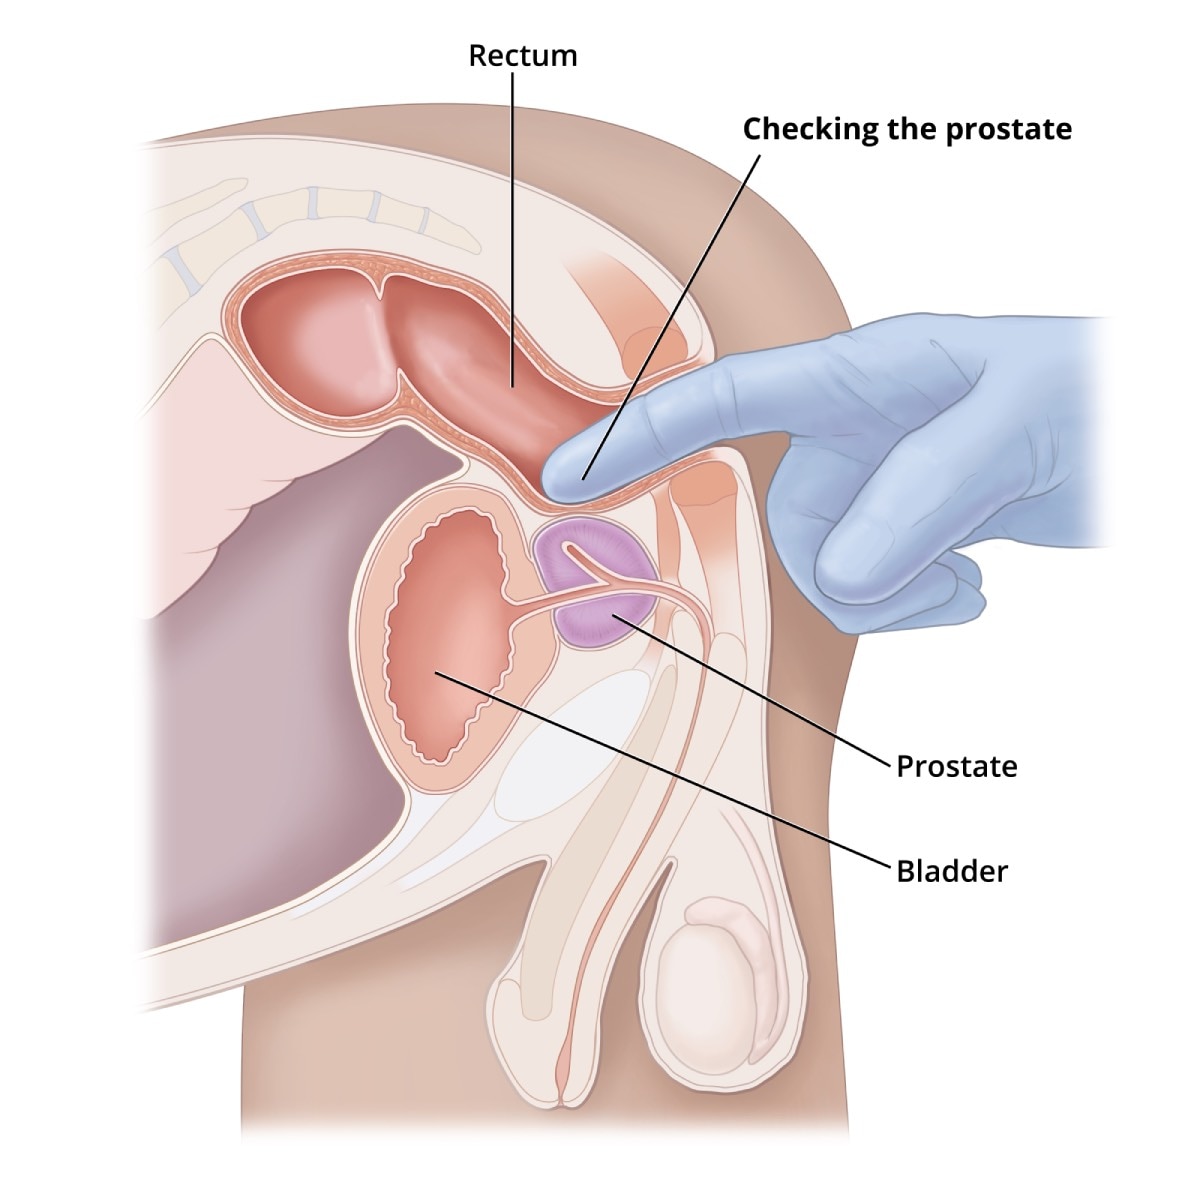 Cross-section illustration of male anatomy shows a gloved index finger inserted into the rectum to check the prostate. Labels show the rectum, prostate, bladder, and the finger checking the prostate.